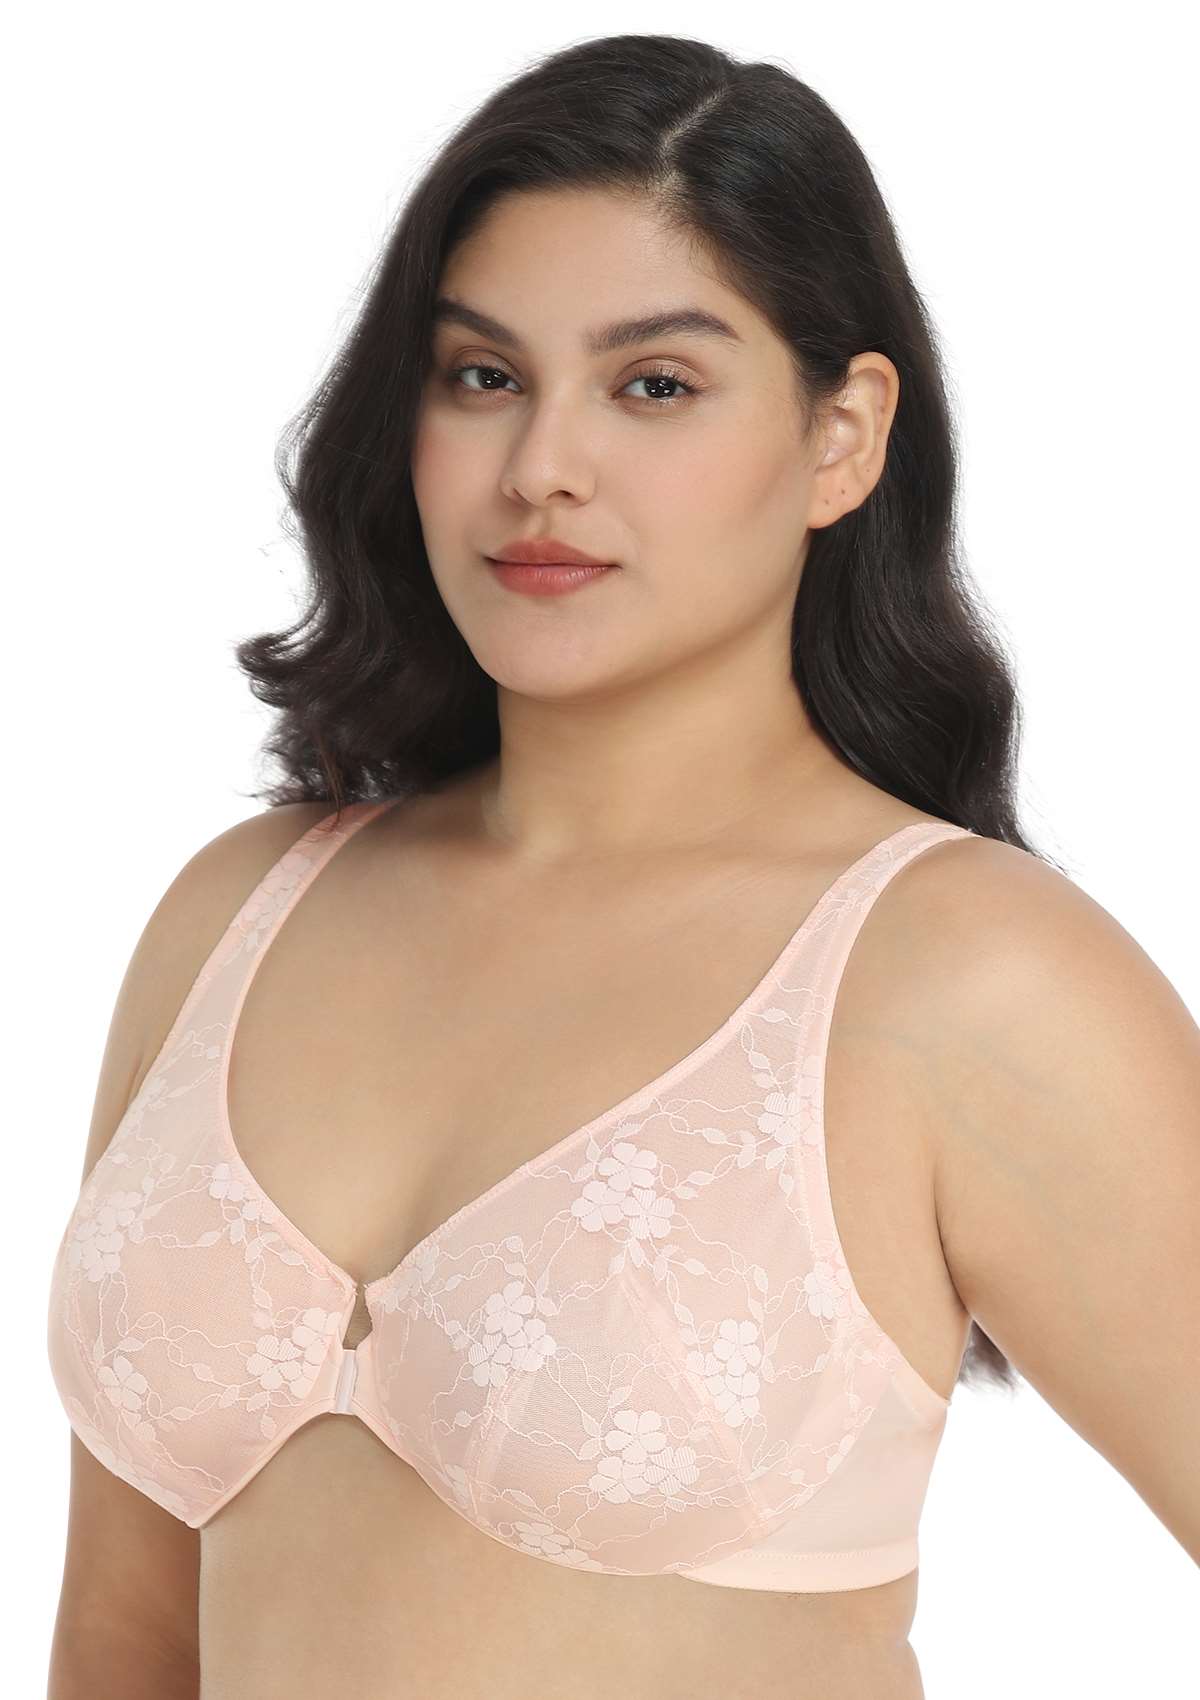 HSIA Spring Romance Front-Close Floral Lace Unlined Full Coverage Bra - White / 36 / D